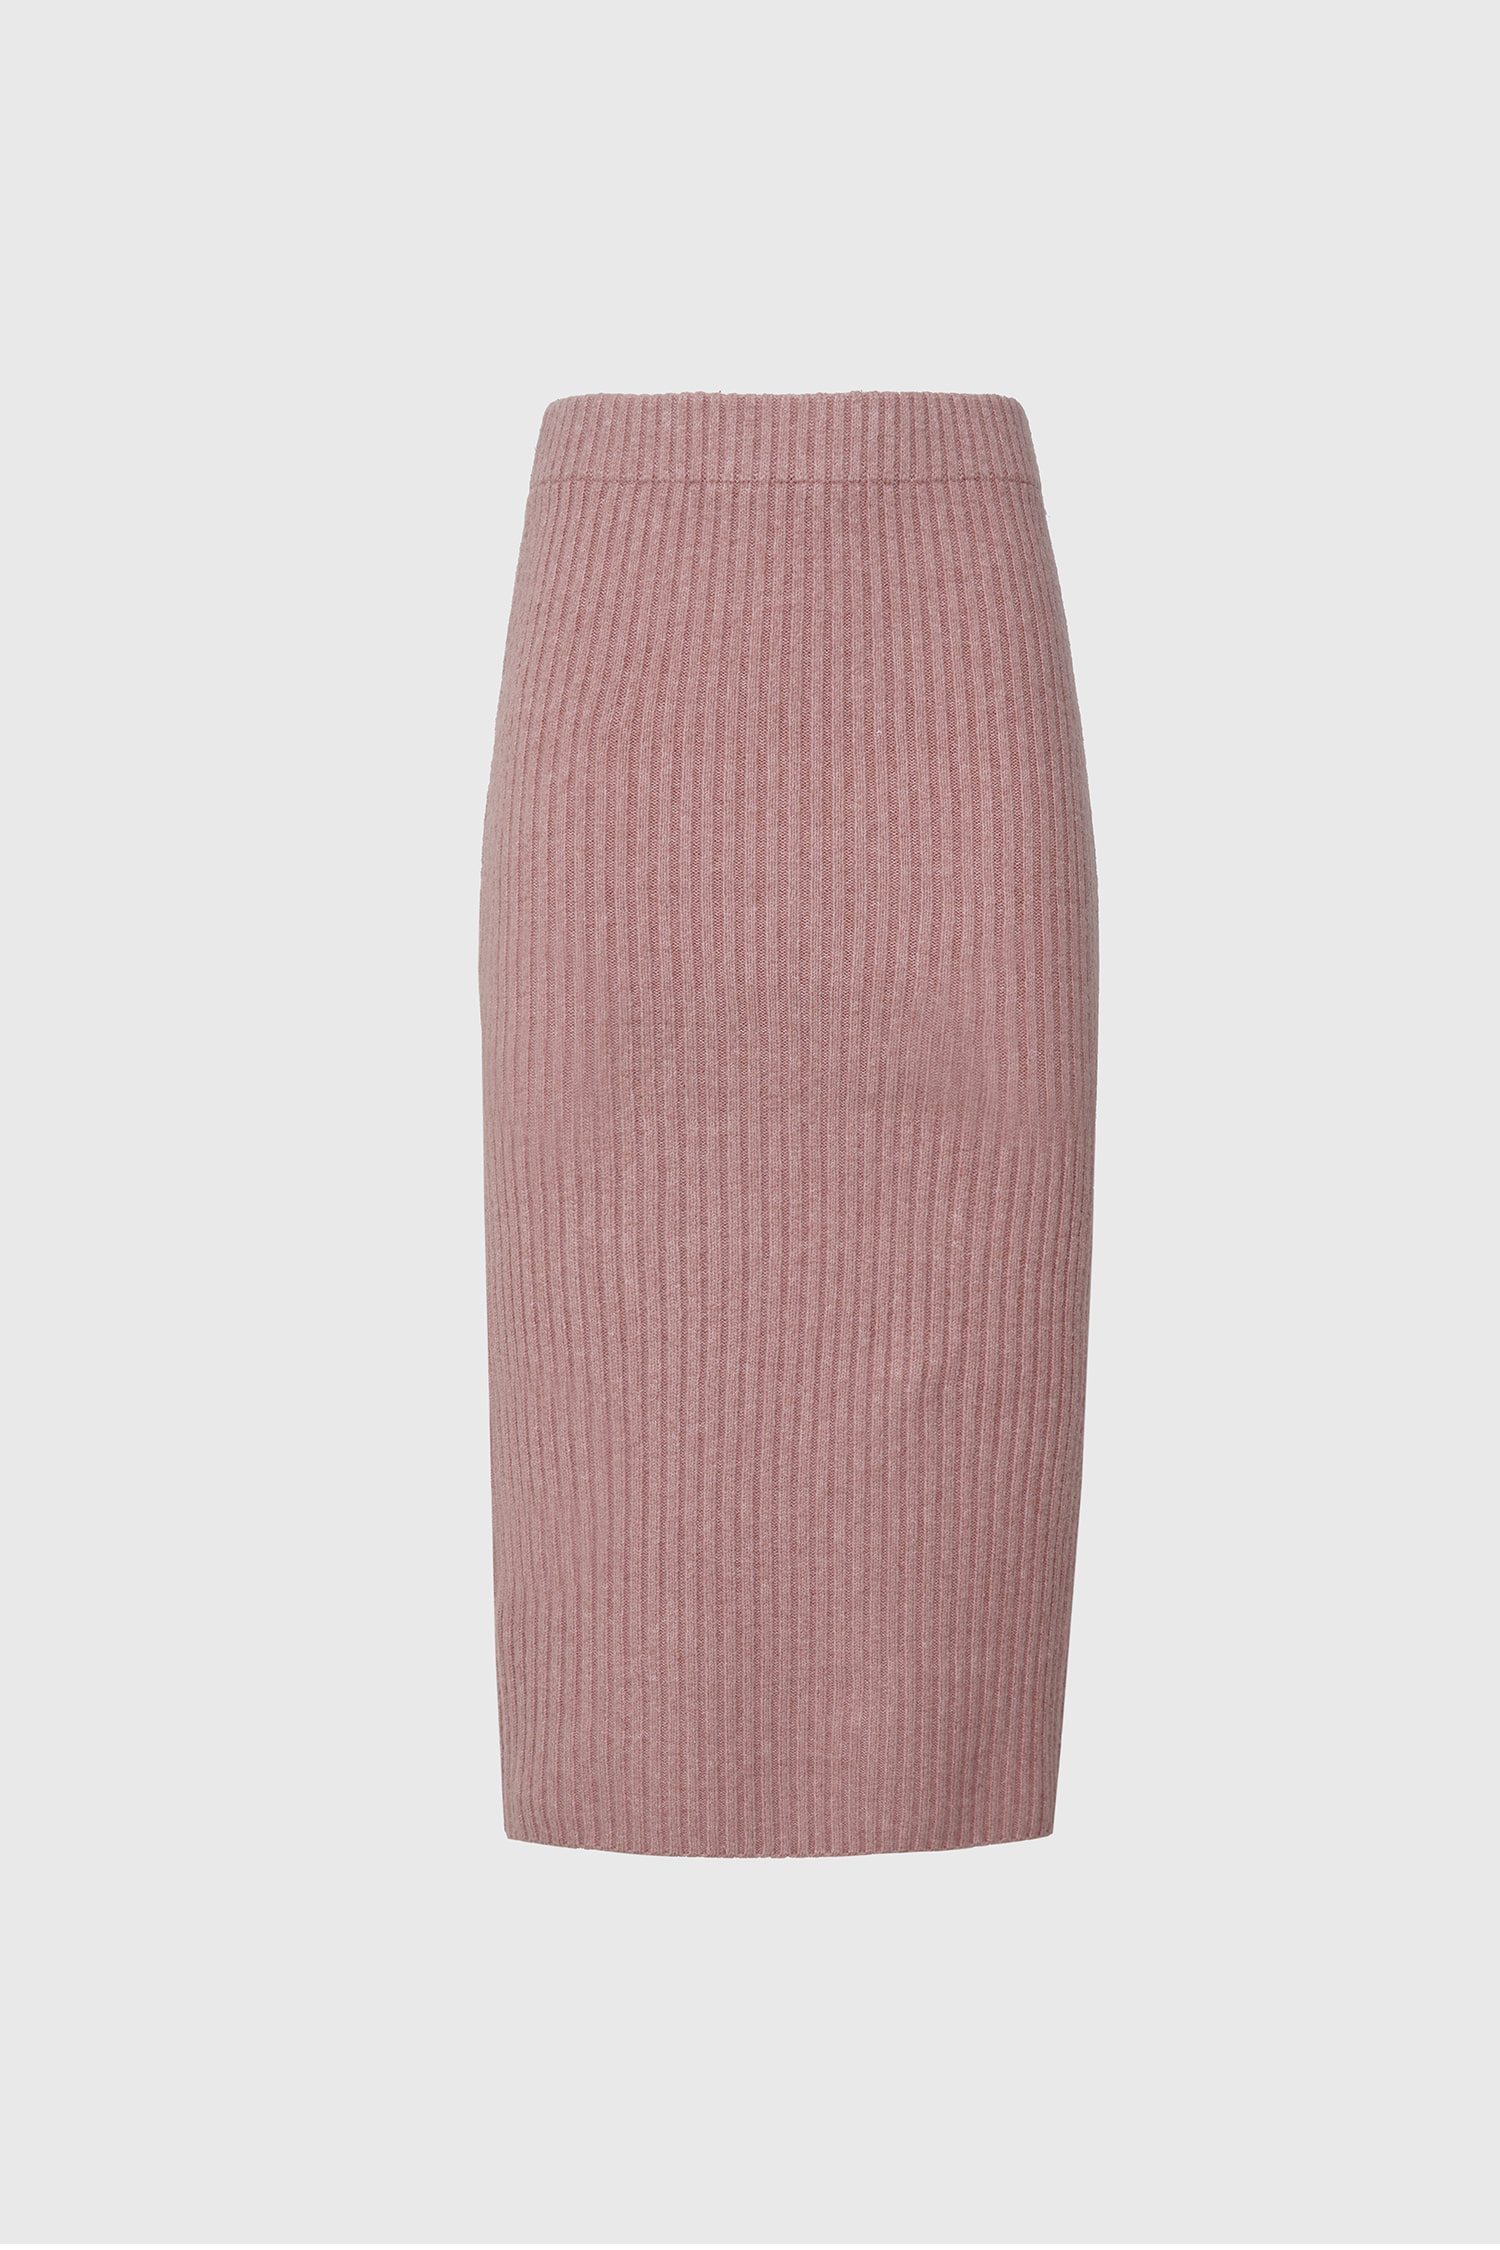 Warmth wrinkle knit skirt - pink